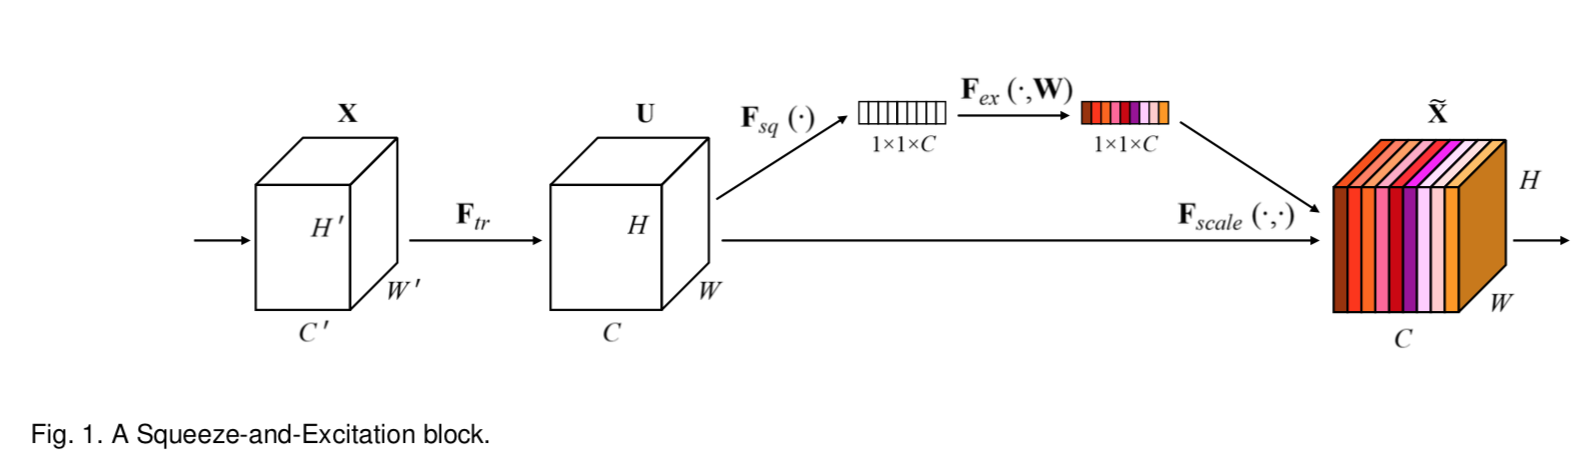 Squeeze-and-Excitation block